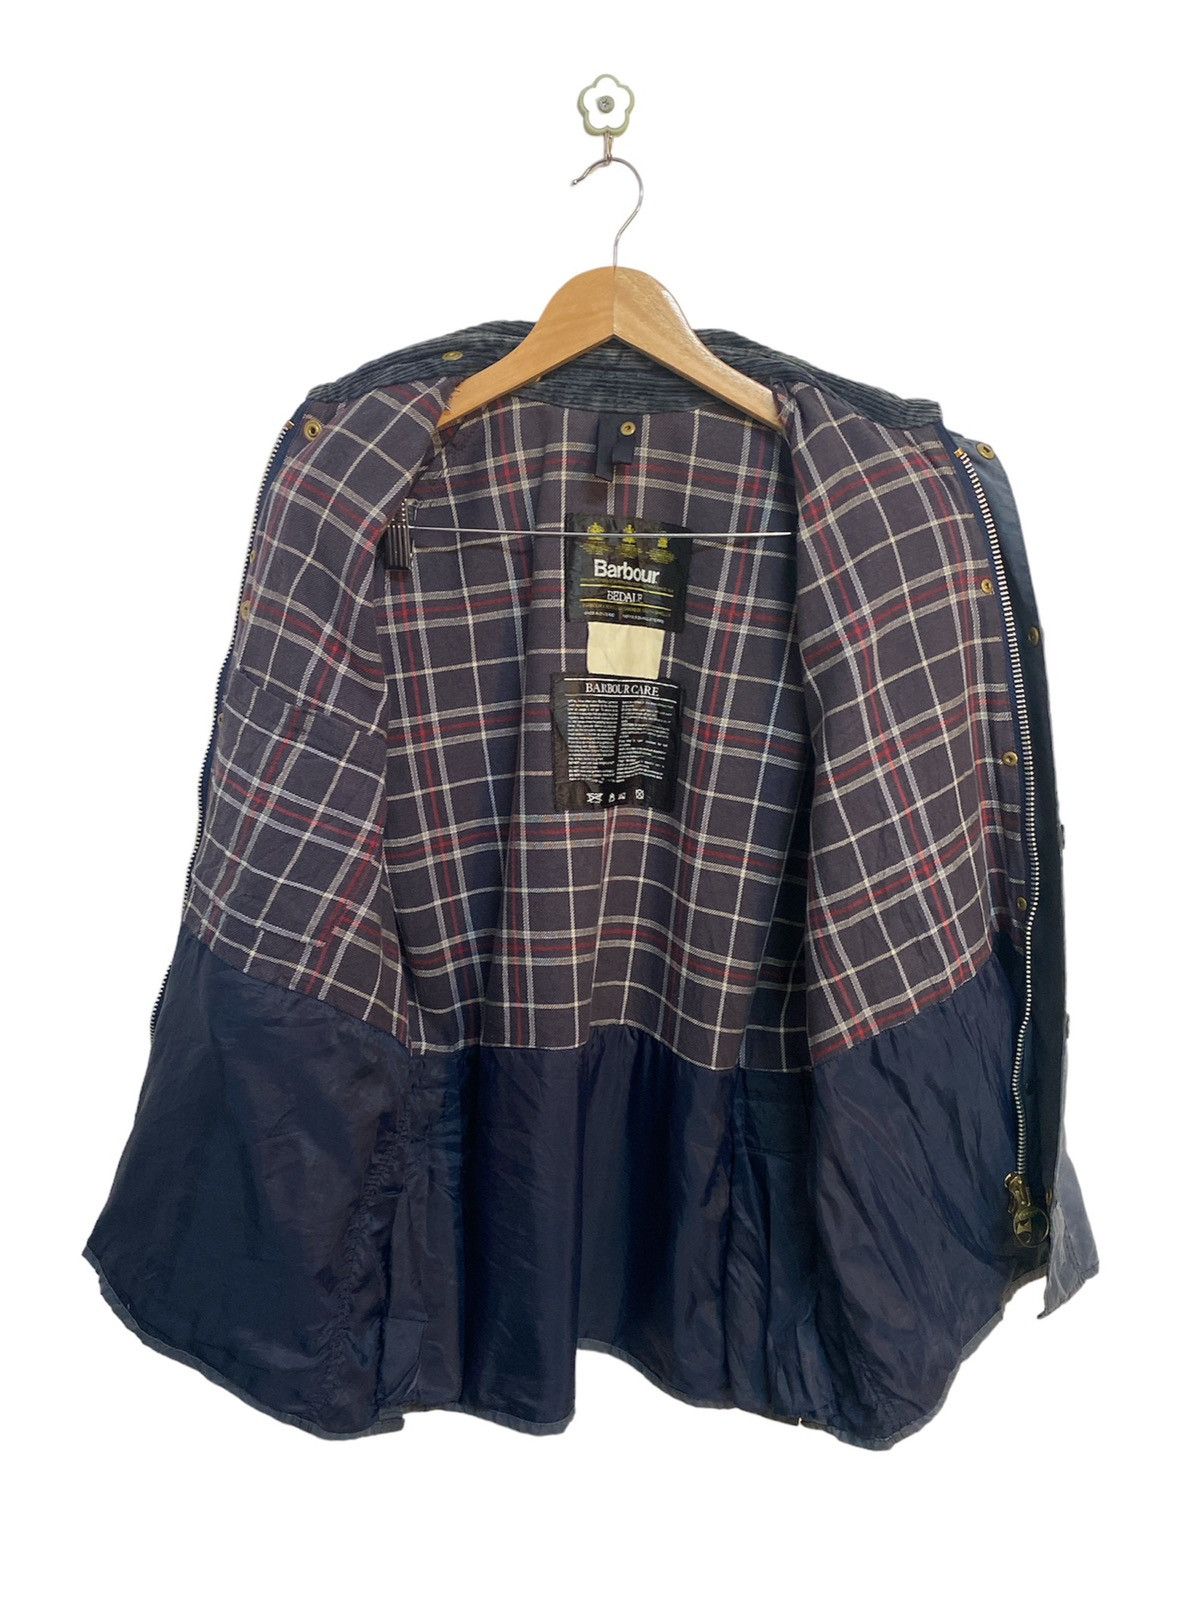 Barbour Classic Bedale A100 Wax Jacket Made in England - 7